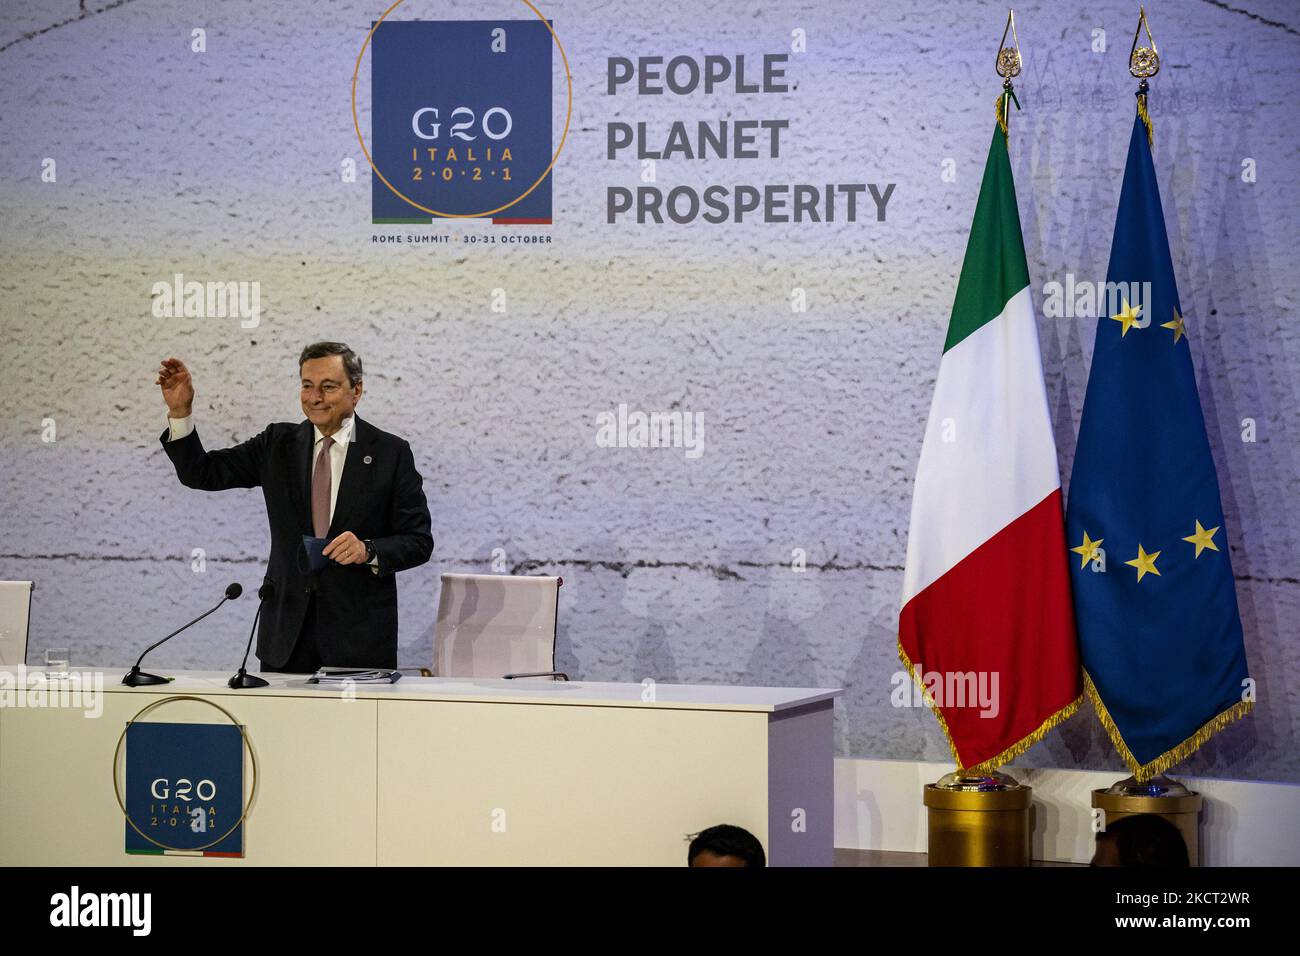 Mario Draghi, Prime Minister of Italy, salutes in a press conference after the G20 Summit in Rome, Italy. (Photo by Celestino Arce/NurPhoto) Stock Photo